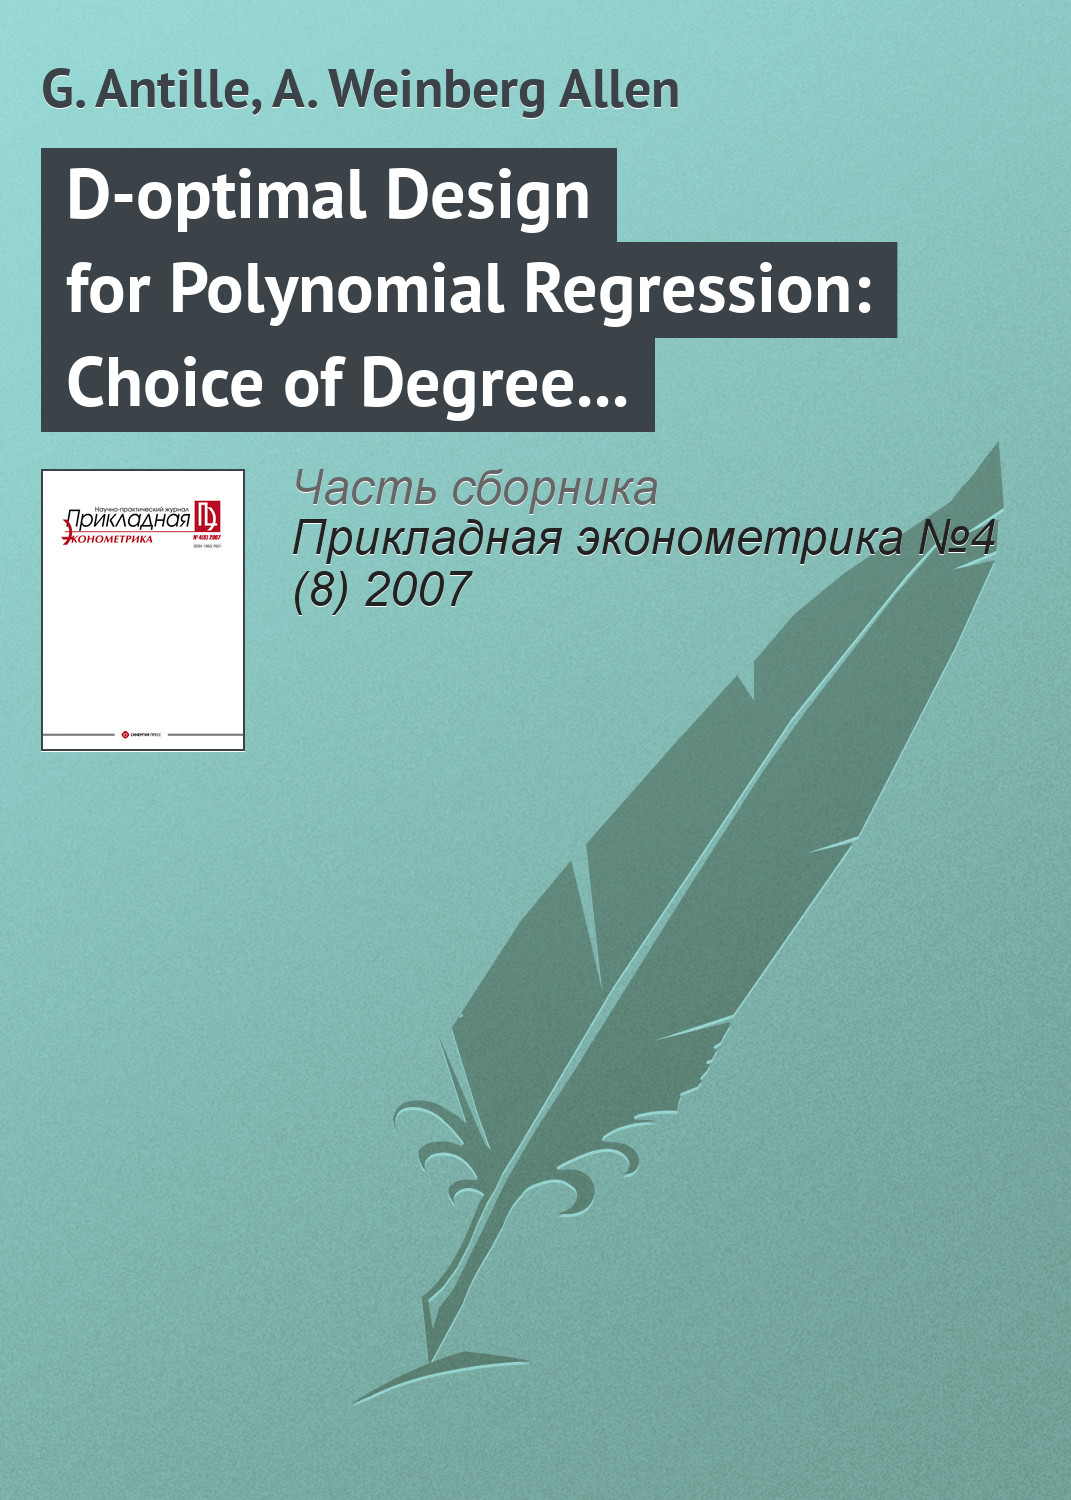 G. Antille D-optimal Design for Polynomial Regression: Choice of Degree and Robustness